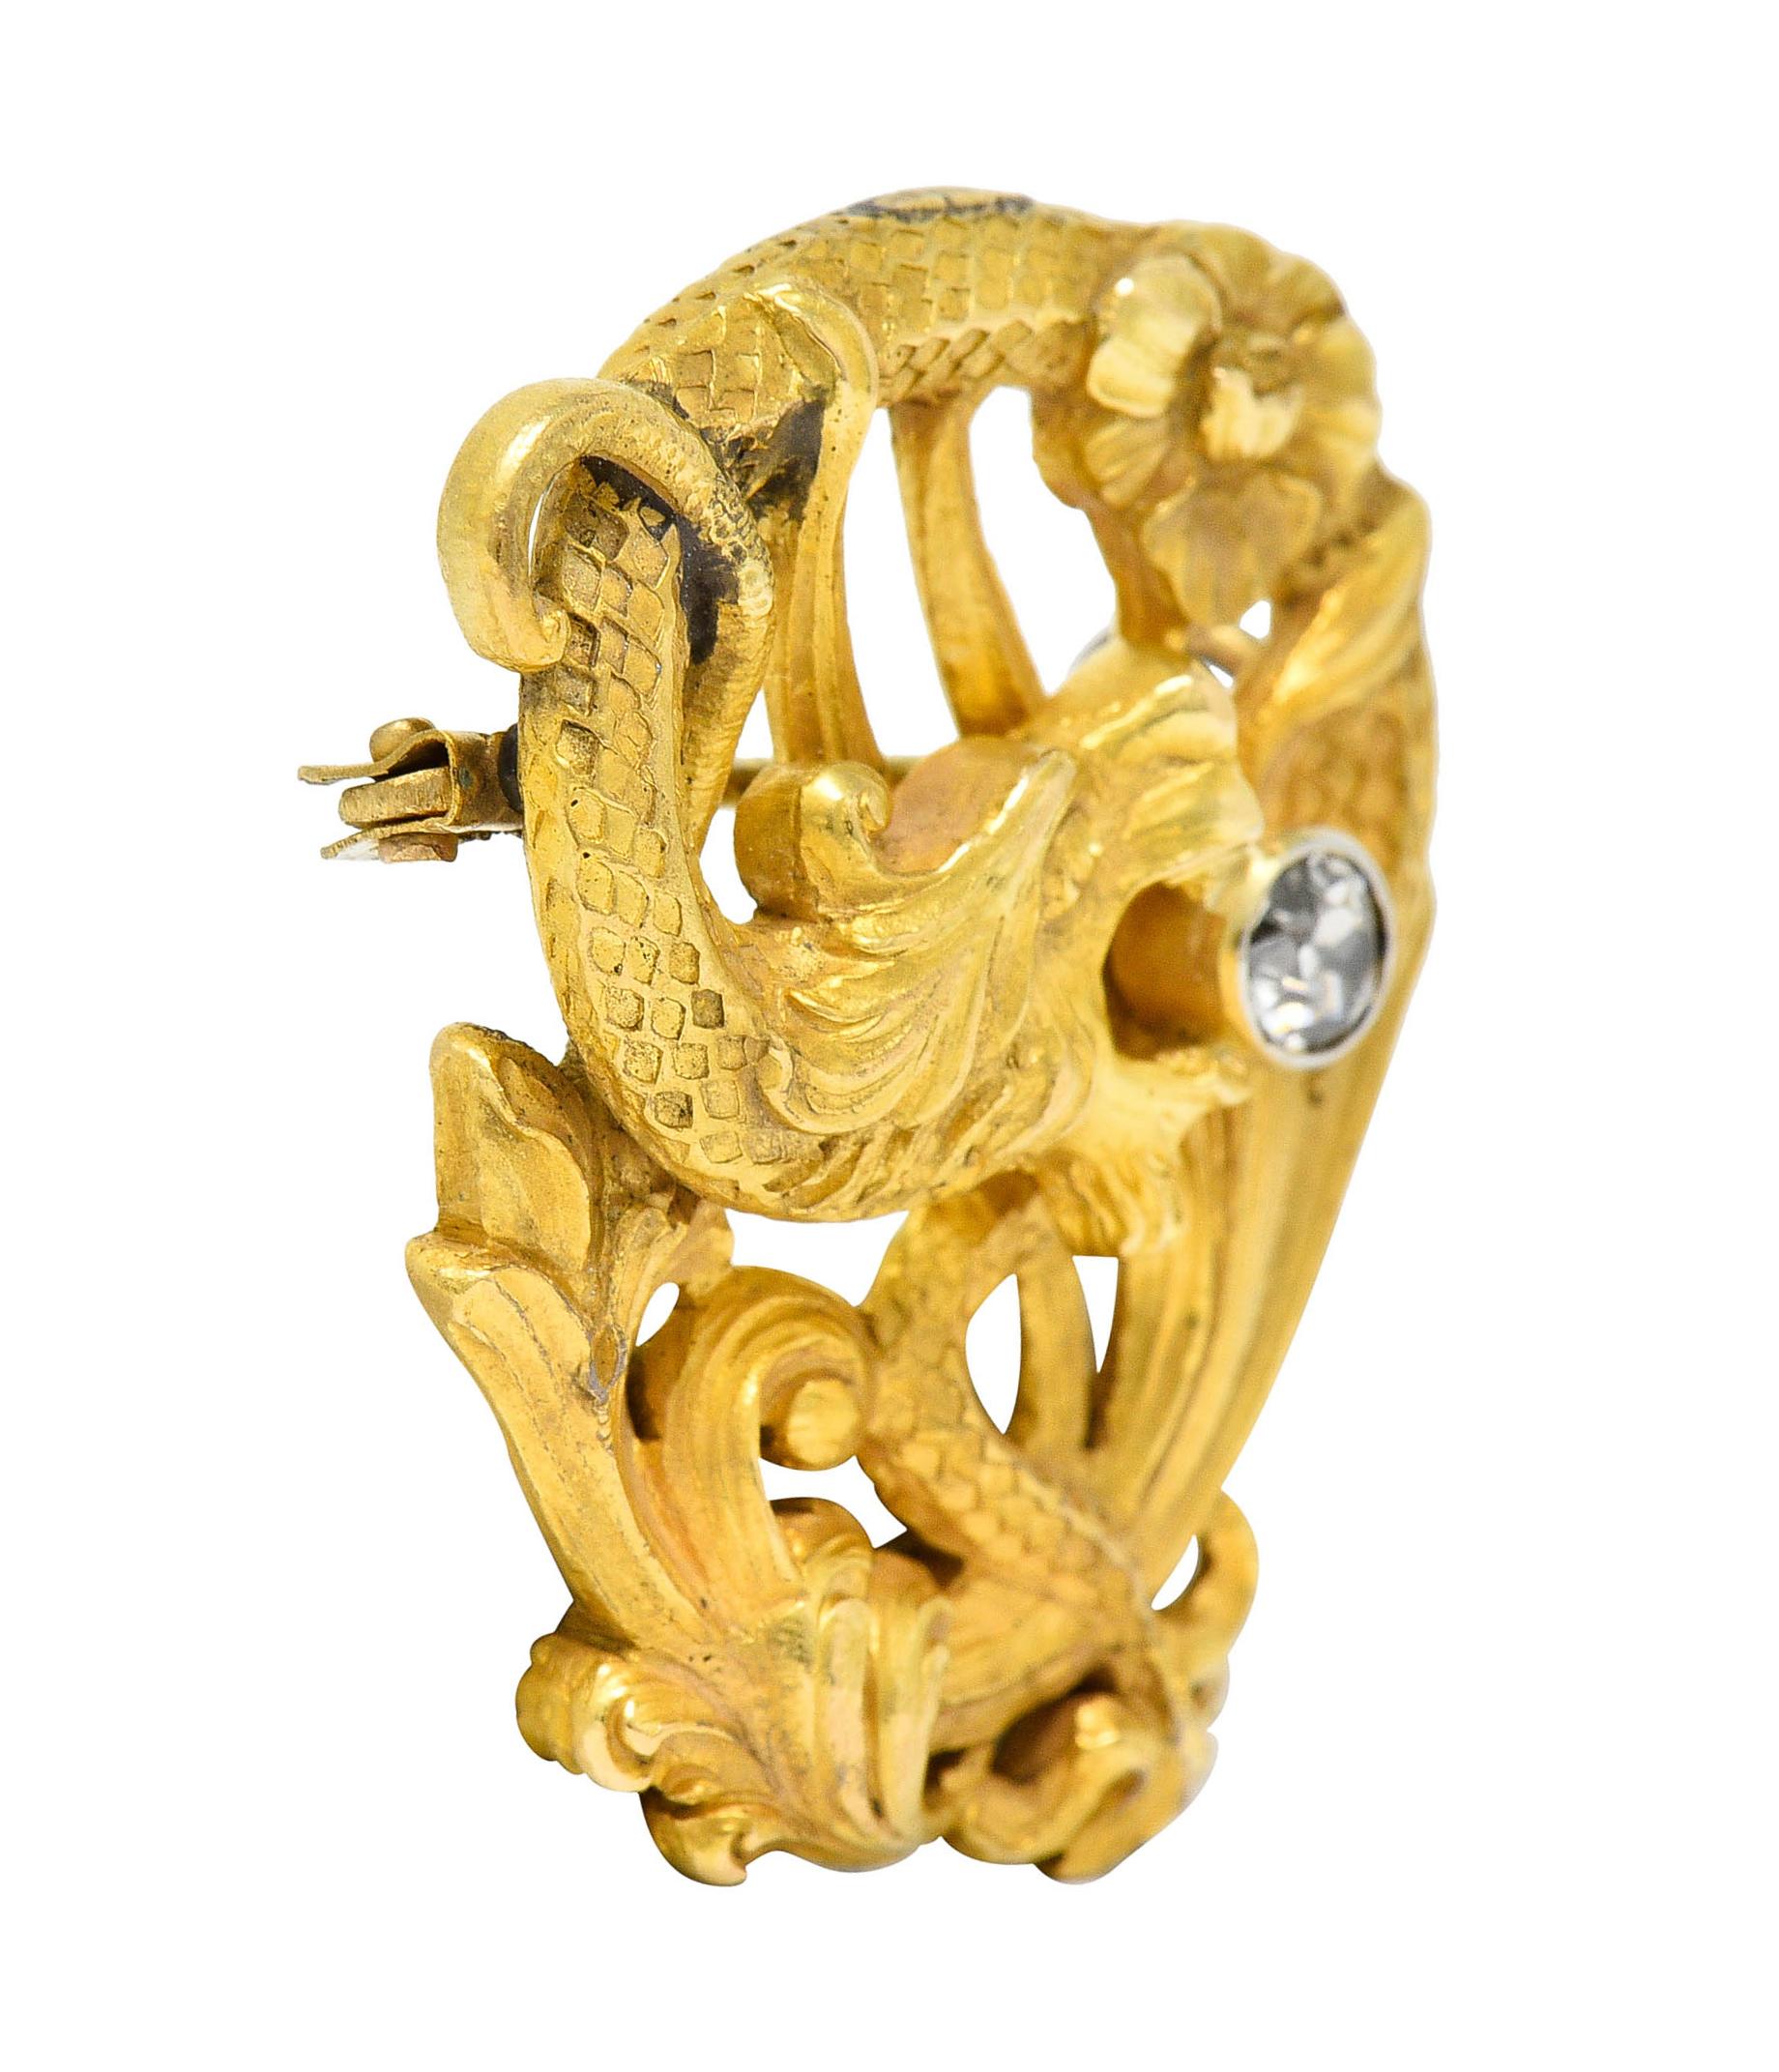 Designed as a serpentine dragon intertwined with whiplash and florals

Matte gold with highly rendered scales and herbaceous details

Clutching a bezel set old European cut diamond in its jaws

Weighing approximately 0.25 carat with J color with SI2